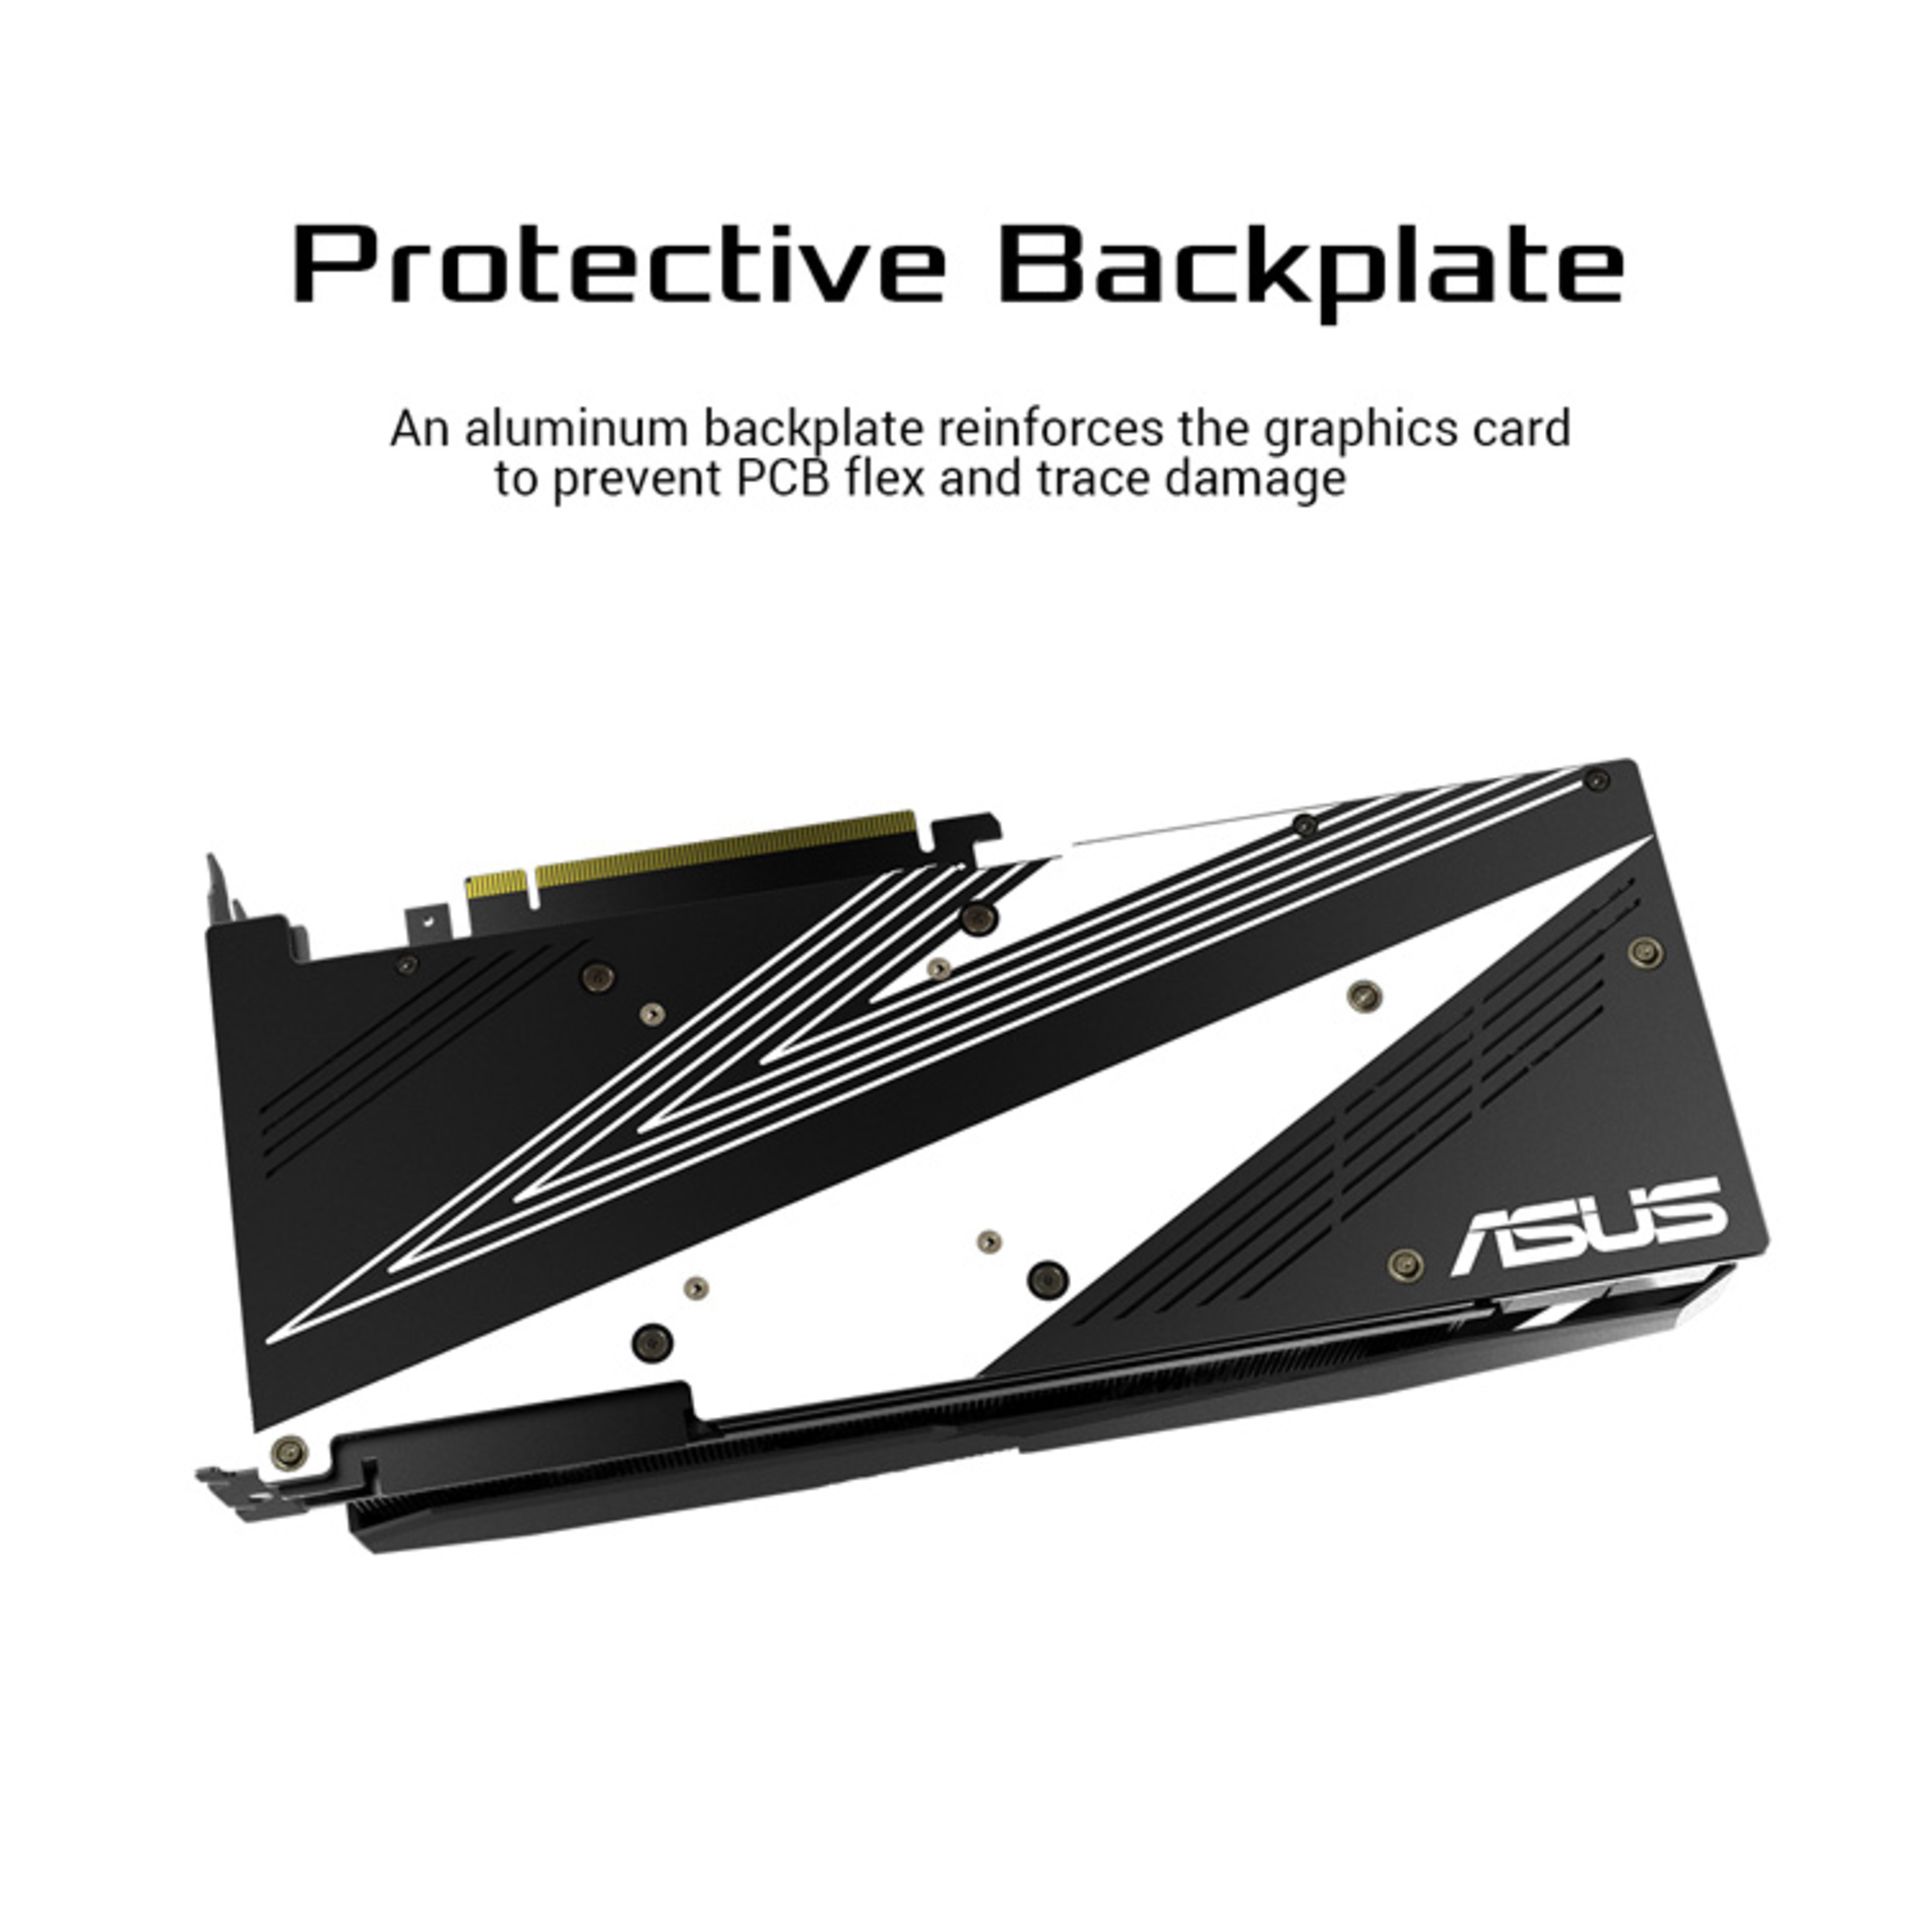 Asus Protective Backplate